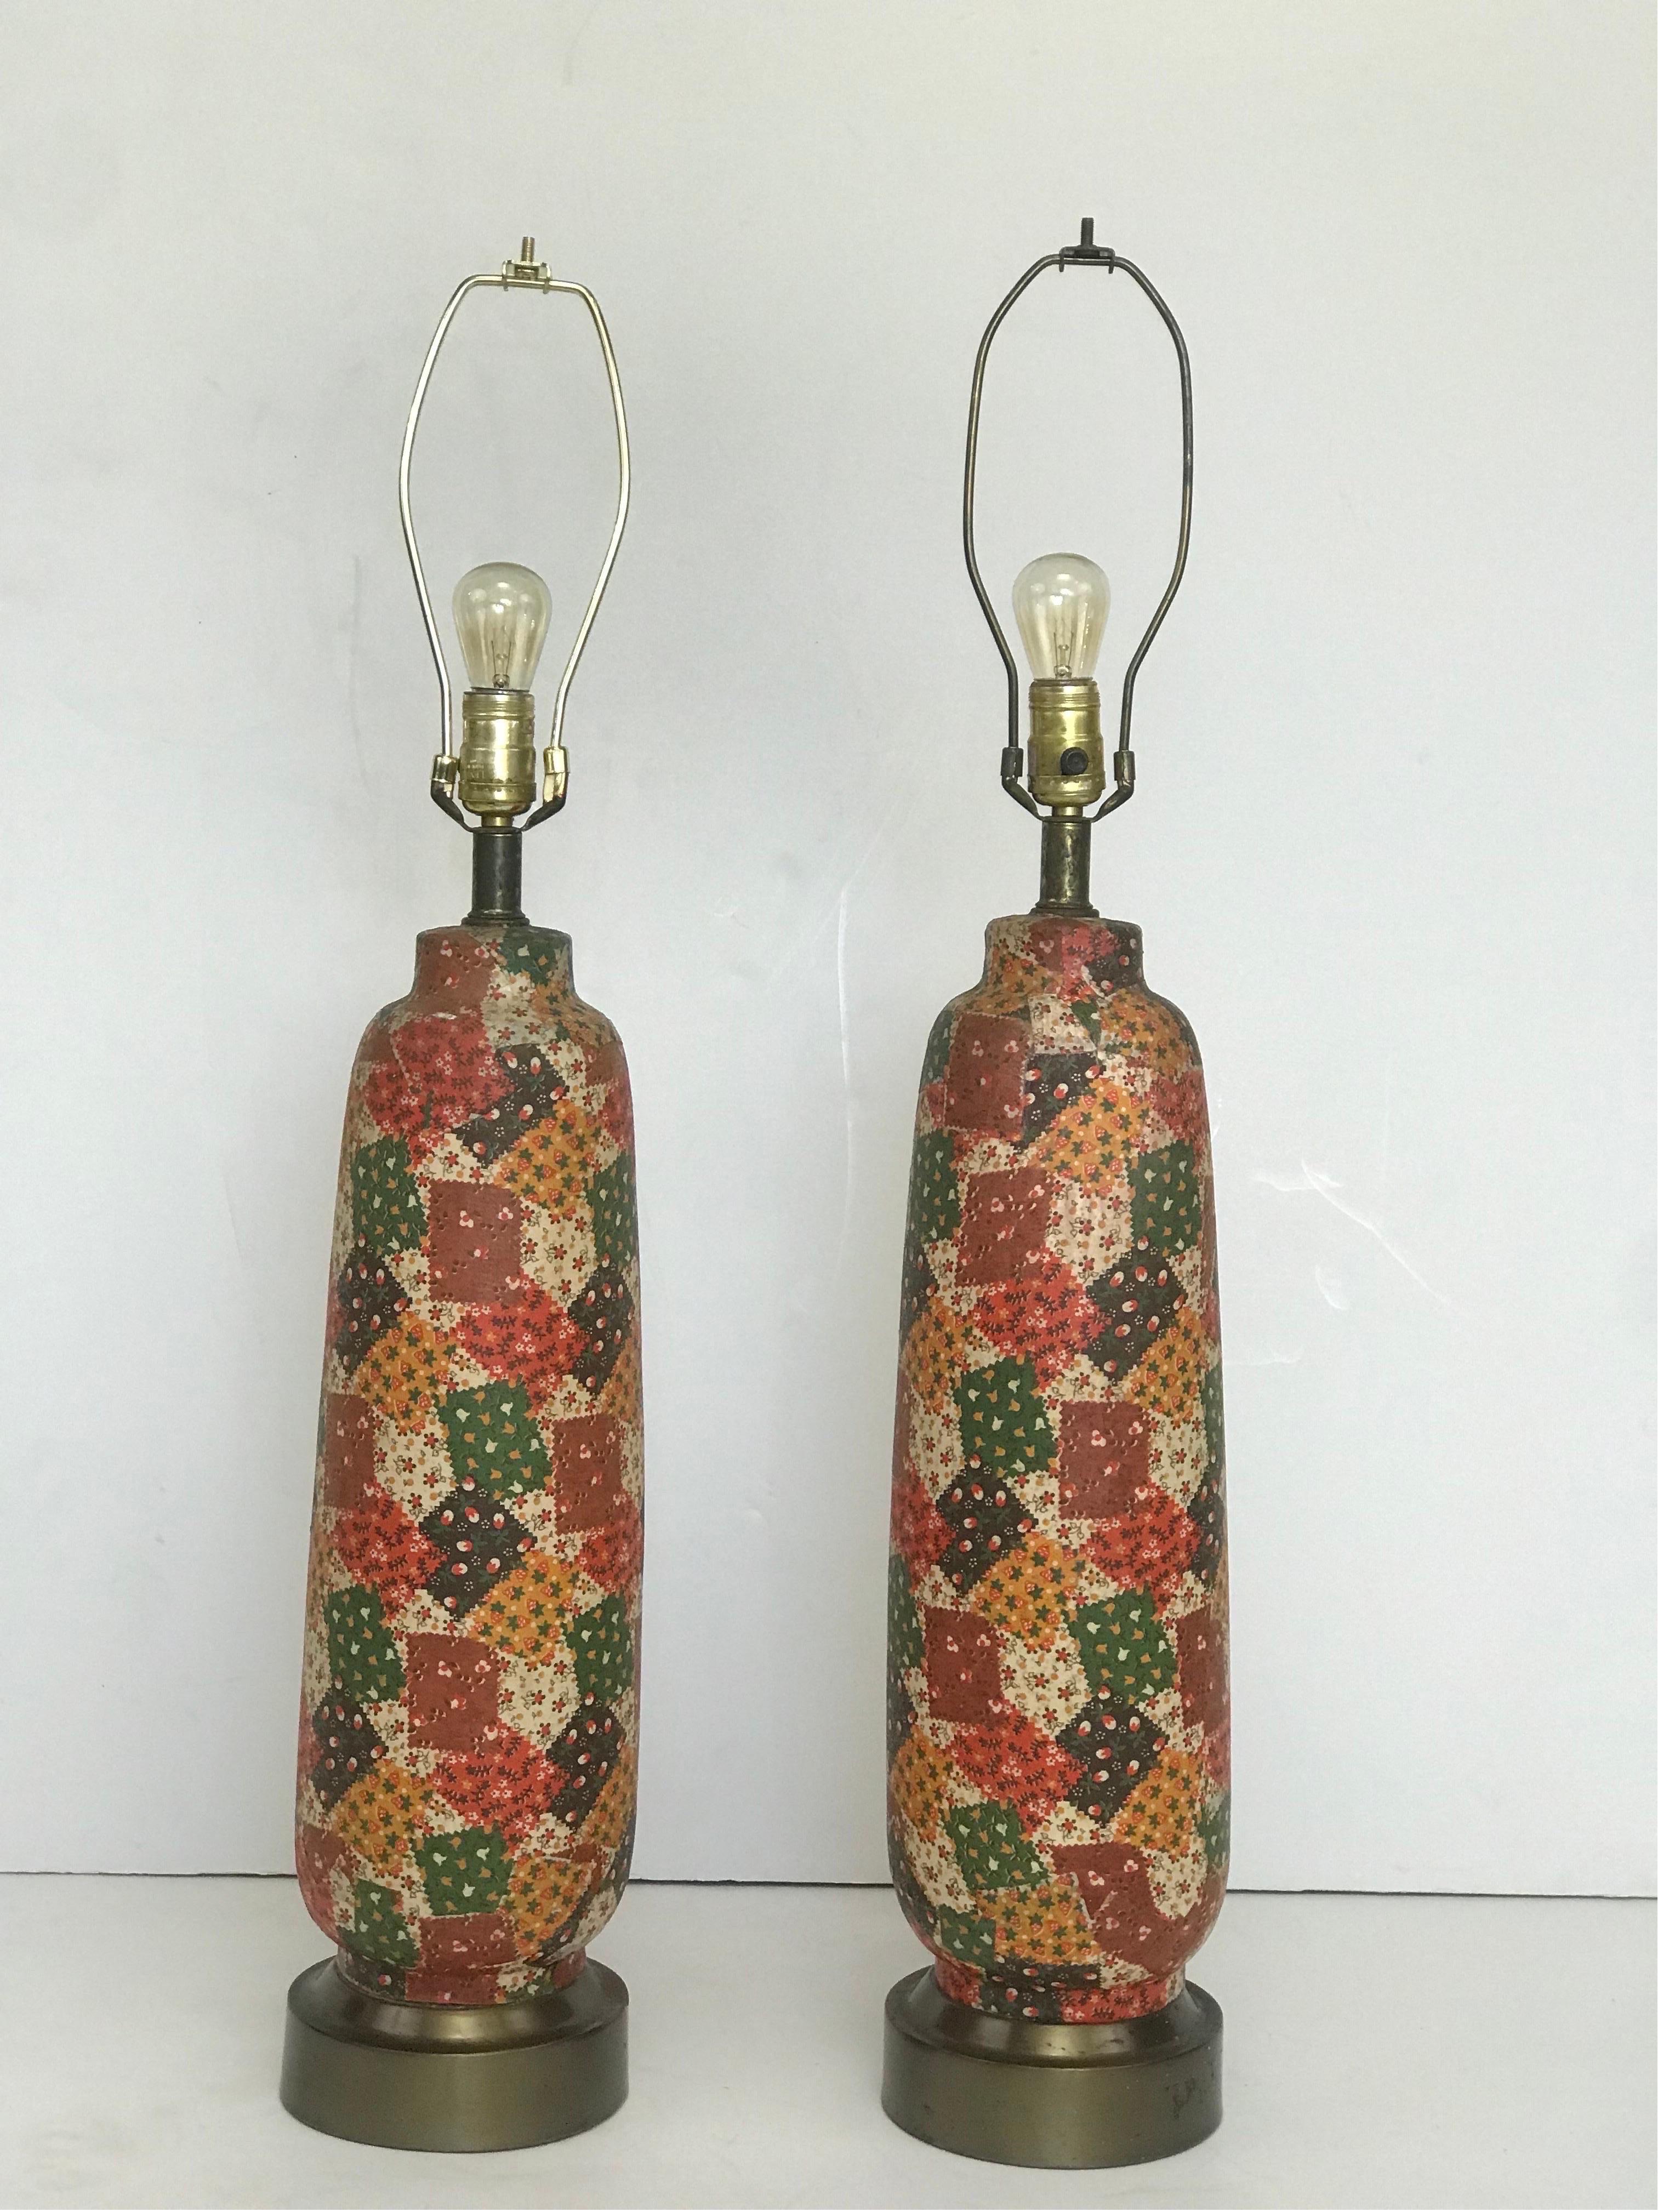 A unique pair of 1970’s spun metal table lamps with an applied papier-mâché style finish in a patchwork quilt theme printed natural material and set on a weighted metal base. 
Not wallpaper repurposed or a heat shrink, the material is natural in